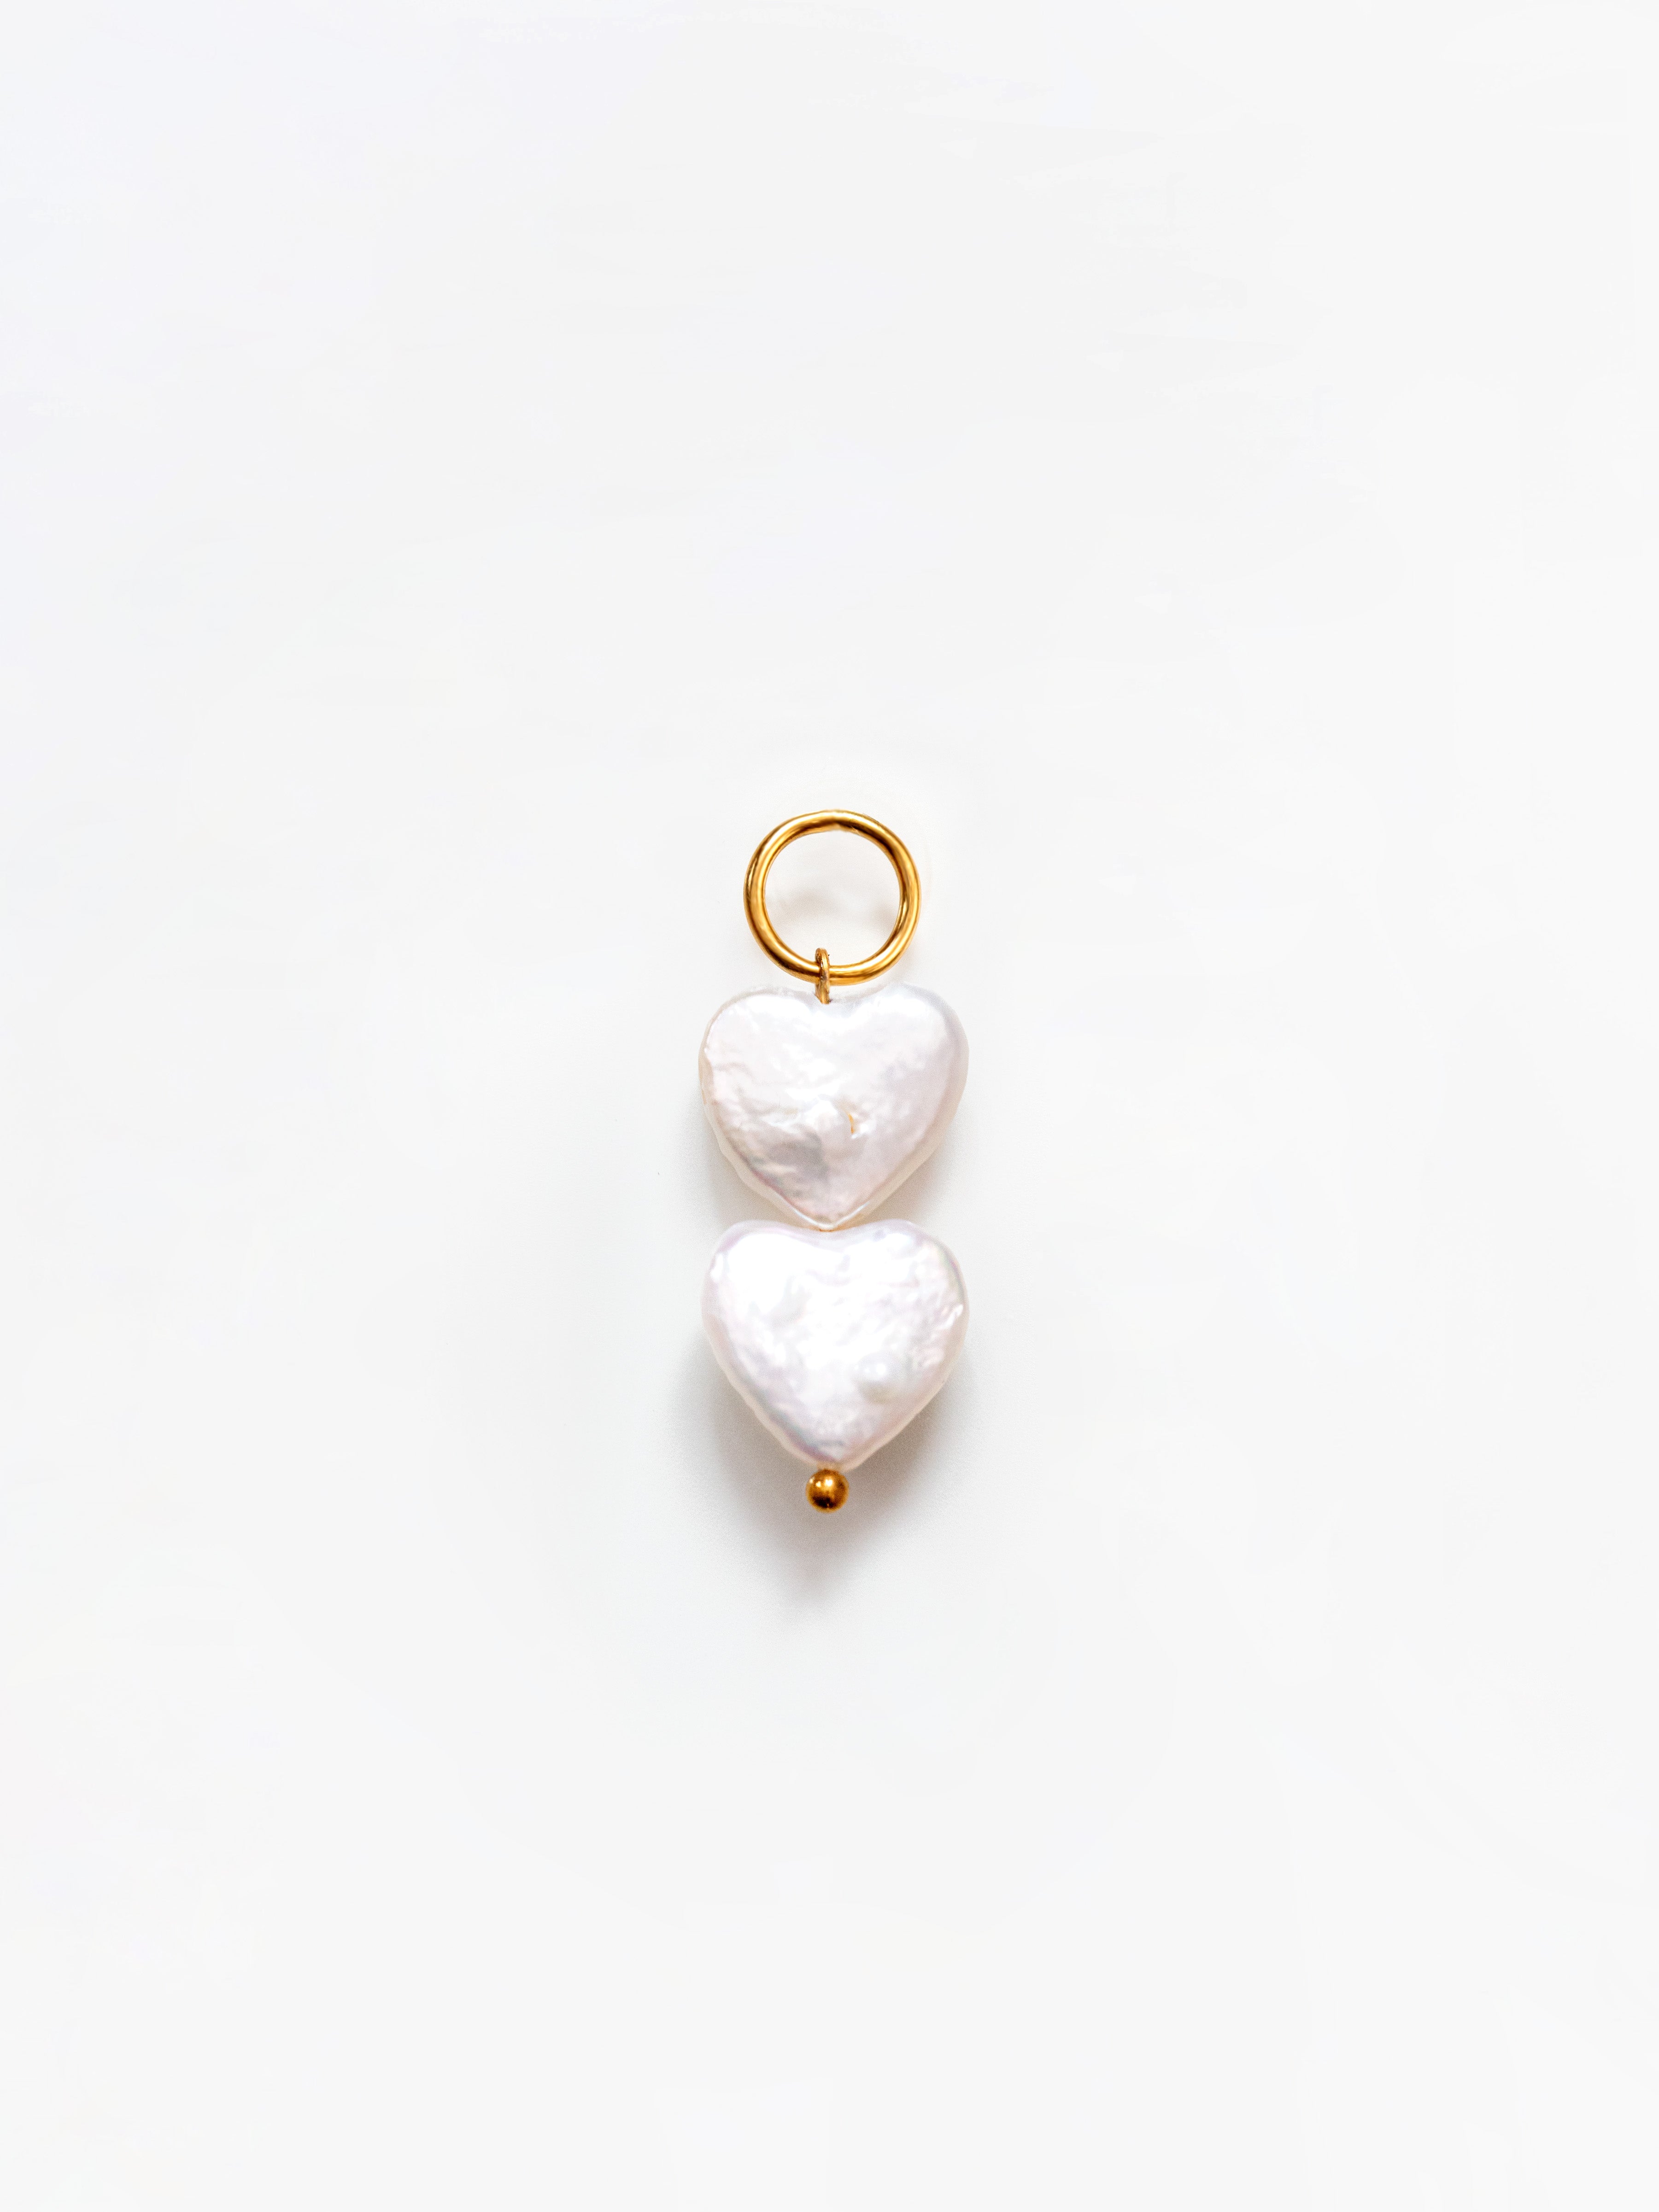 Gold Heart Pendant / Charm With Two Pearl Stones